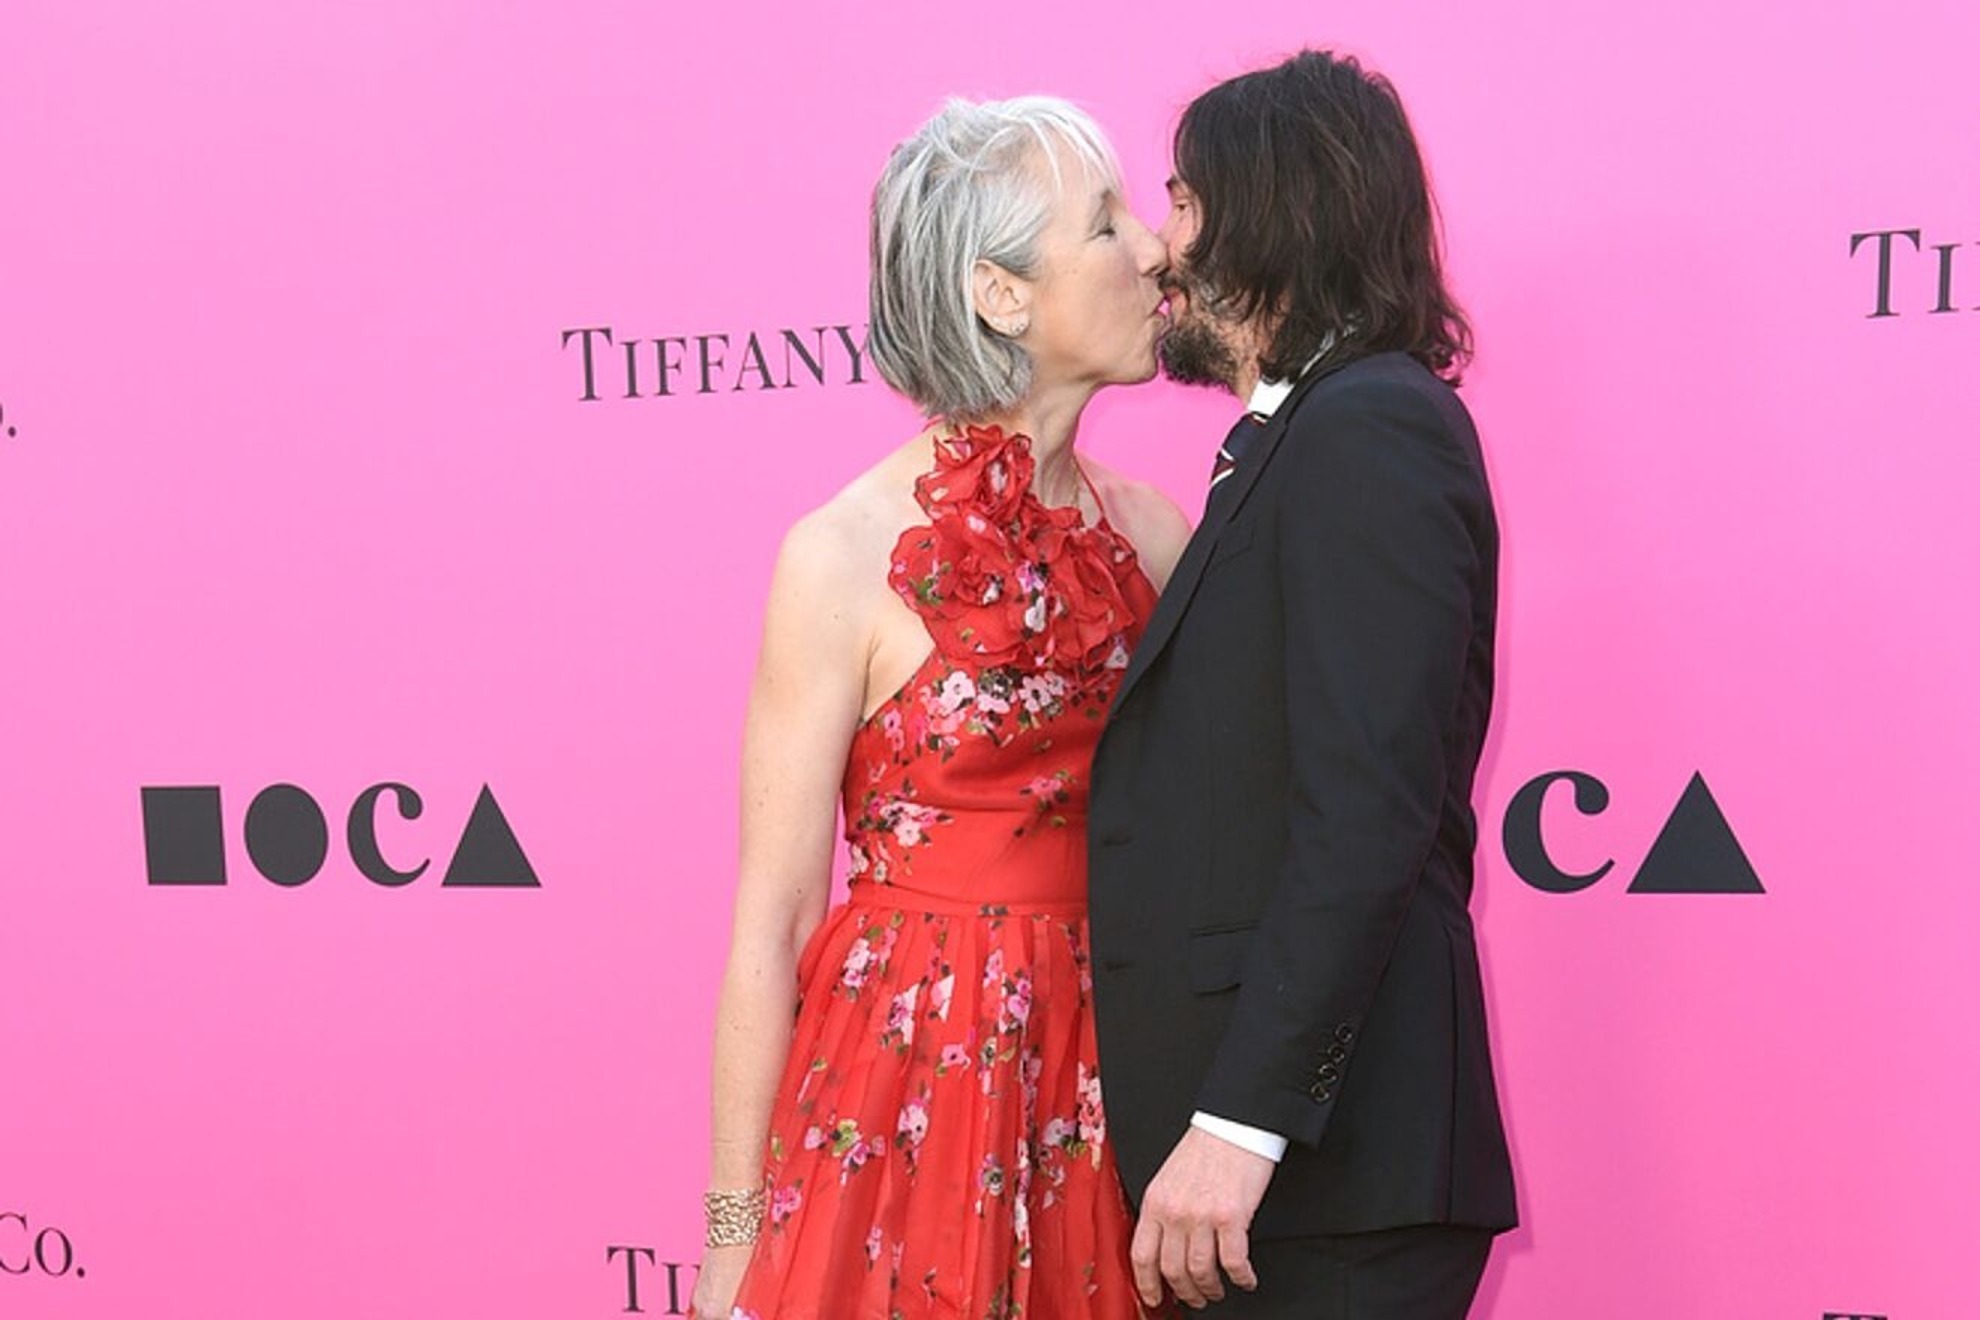 Keanu Reeves and his girlfriend give each other a tender kiss in public, but he... doesnt close his eyes